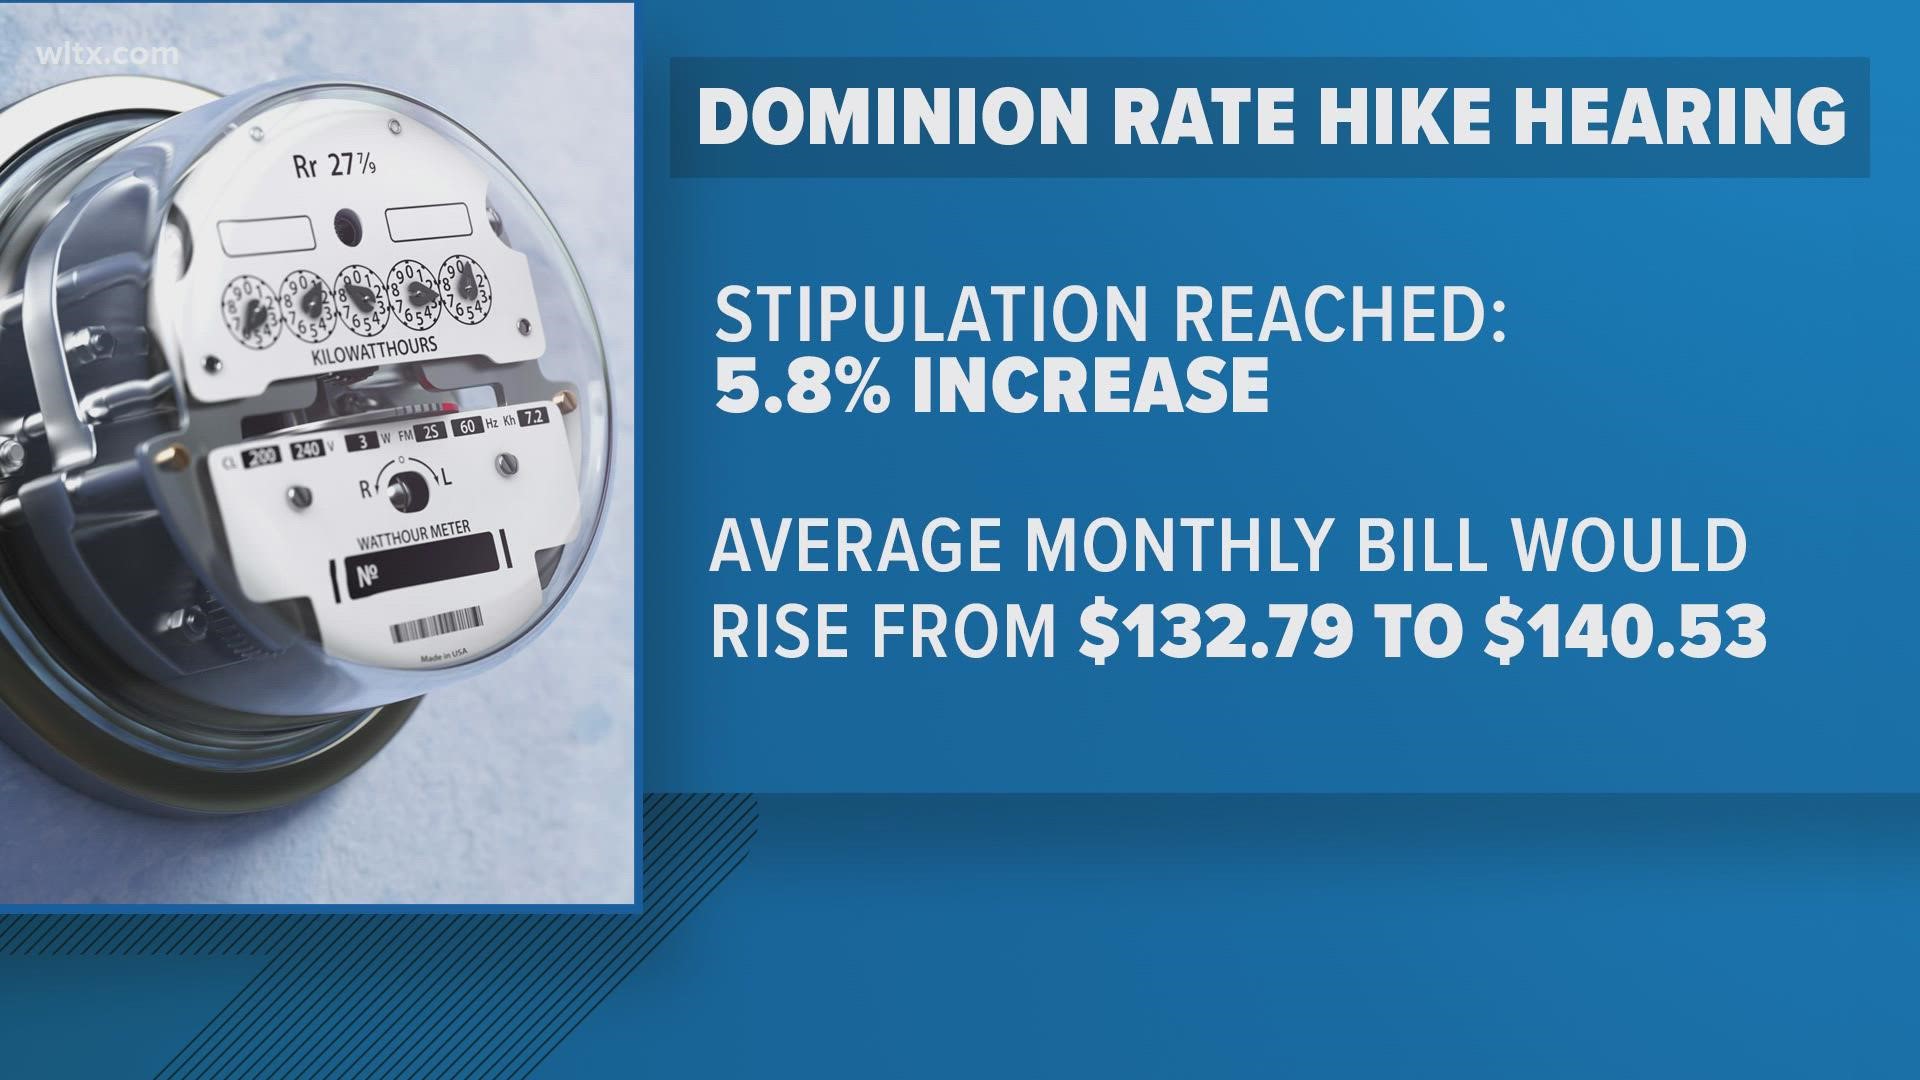 South Carolinians who power their home through Dominion Energy will soon see a rate increase.